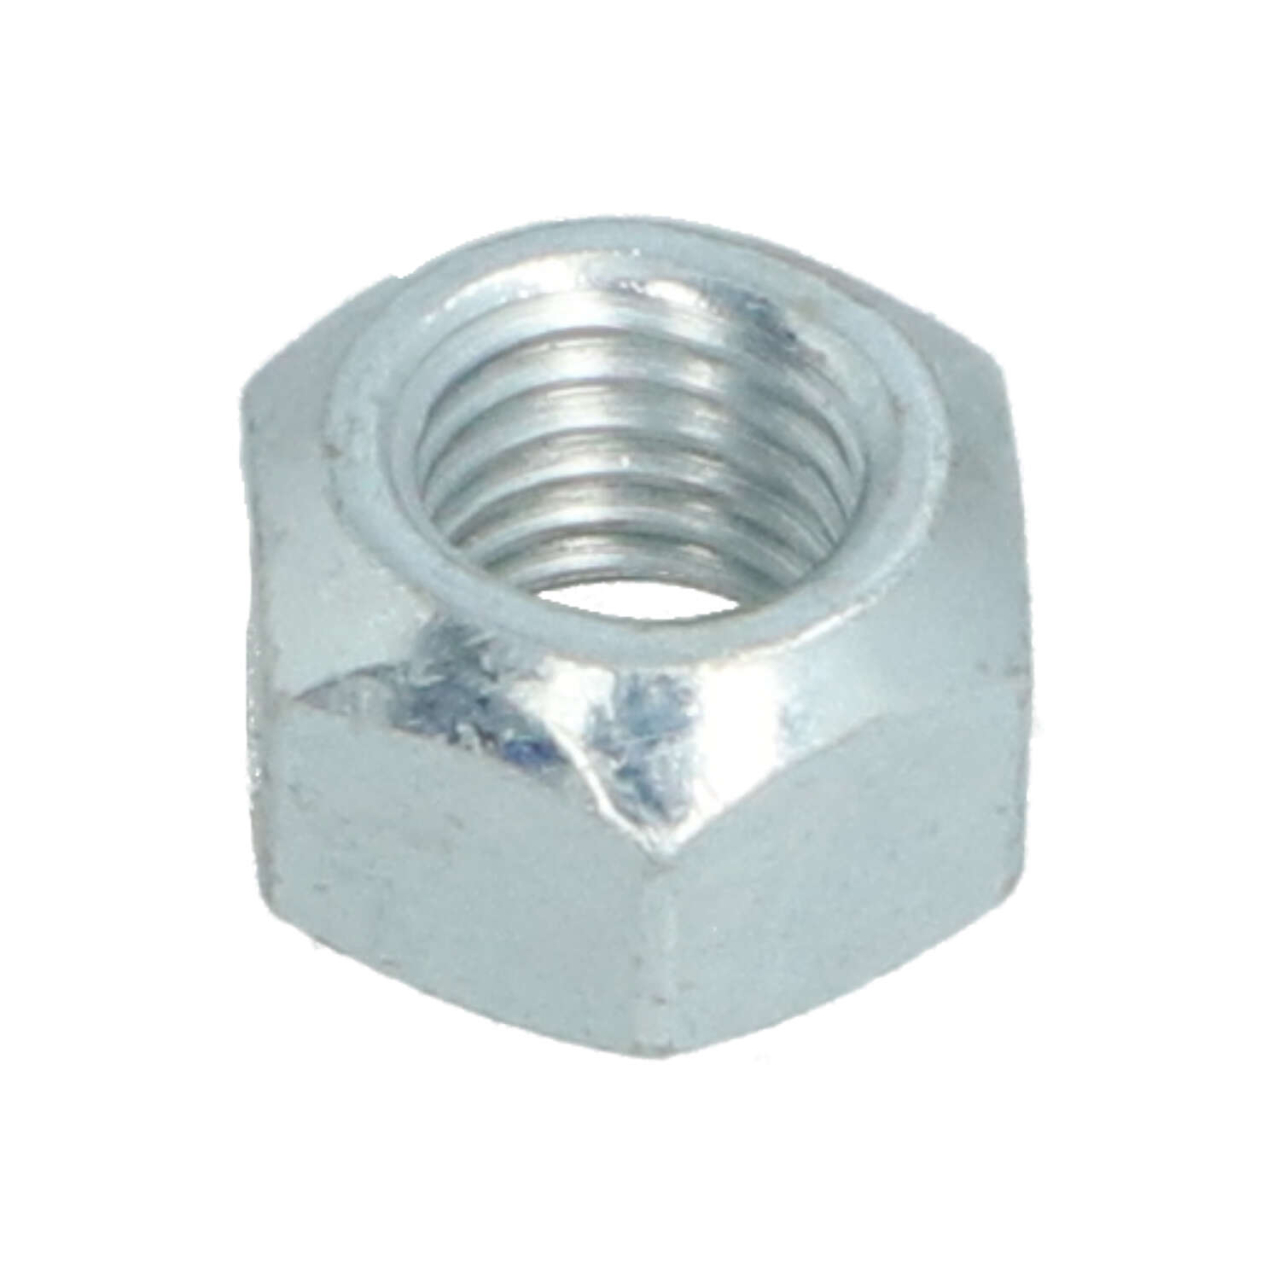 All-metal nut with squeezing device M14x2 - DIN980 galv. 10.9 fitting for Maschio / Gaspardo F01230073R